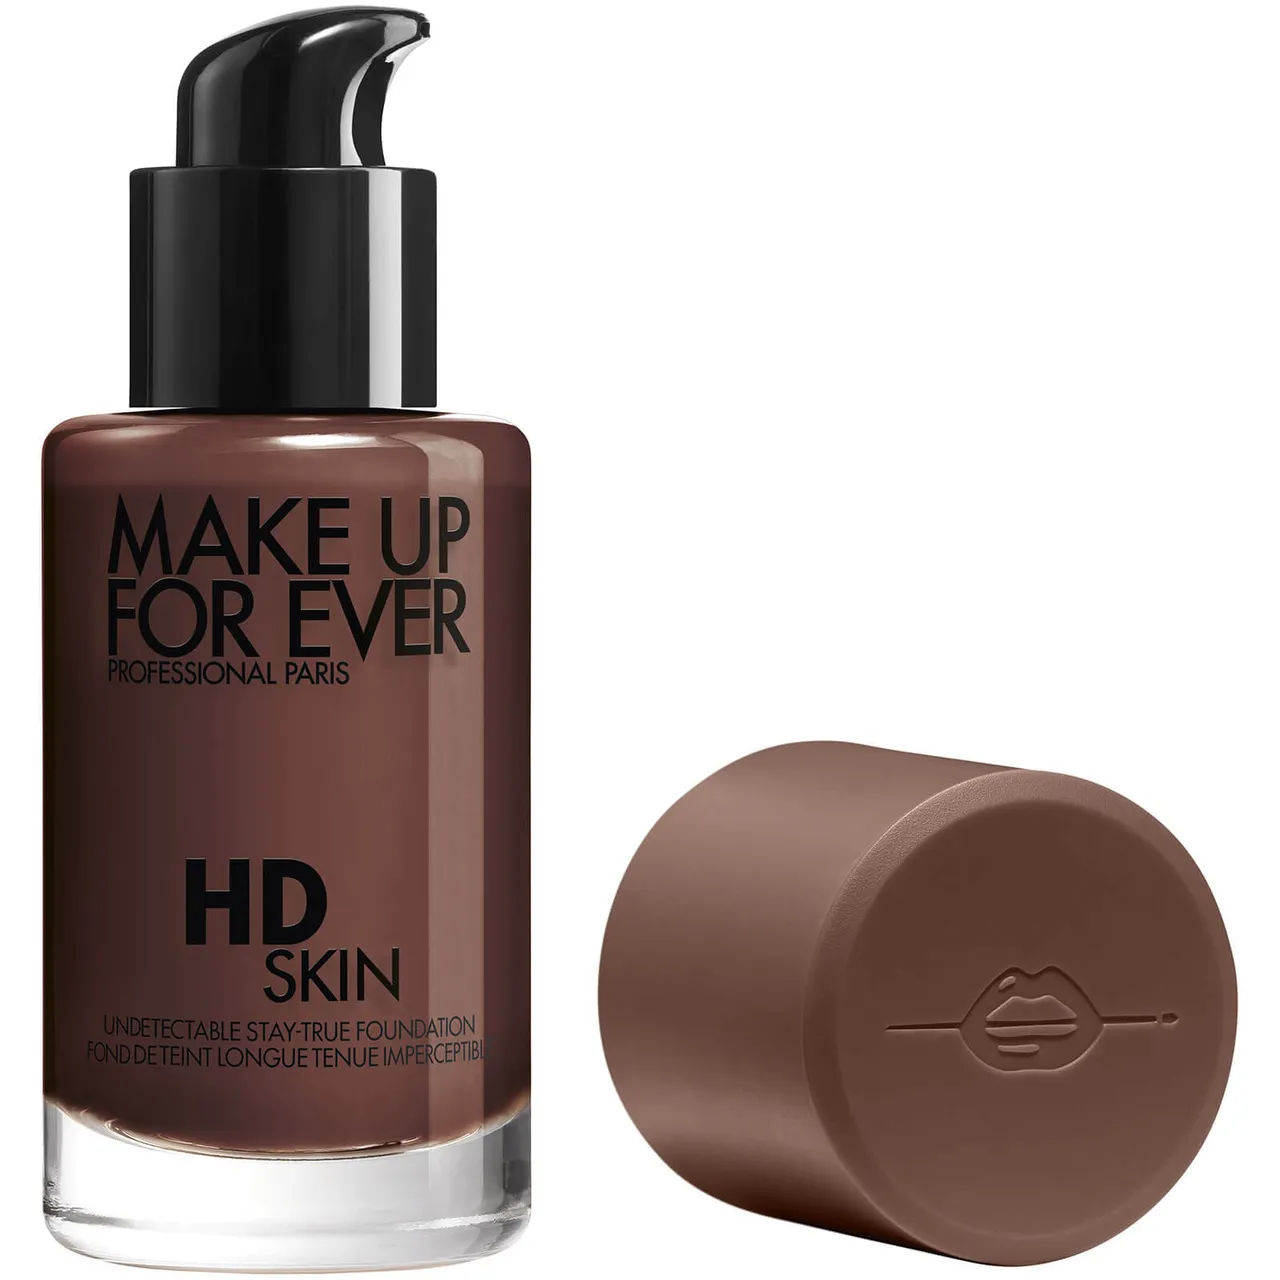 Make Up For Ever HD Skin Foundation 30ml (Various Shades) - 4R76 Cool Ebony